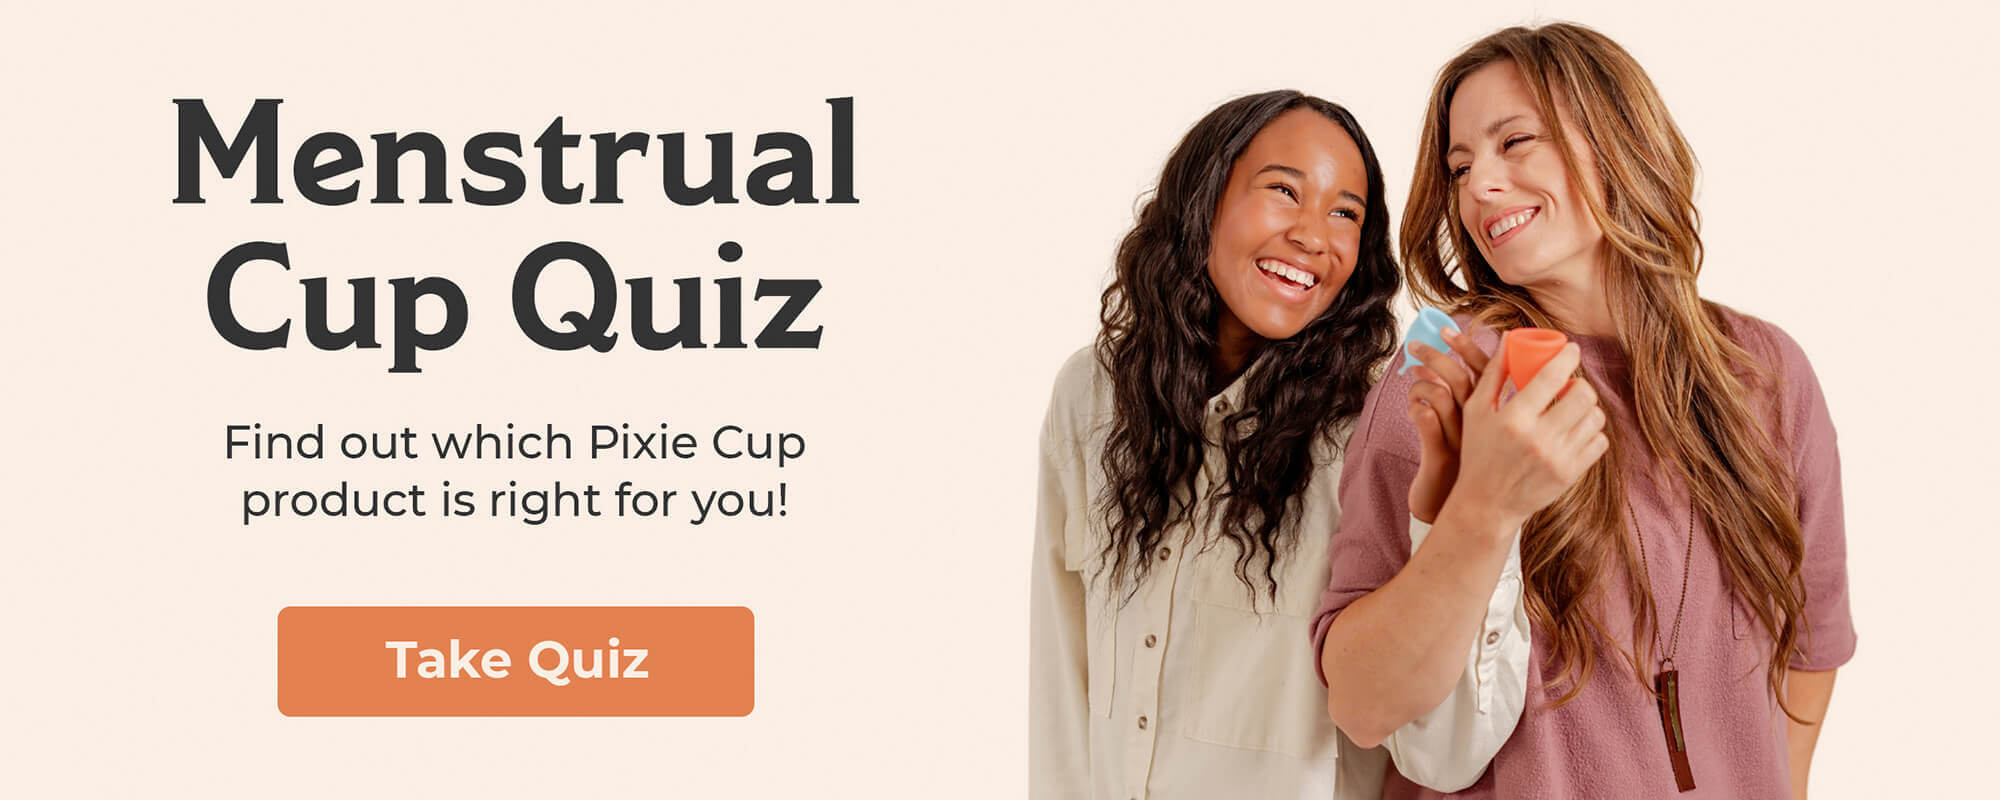 Find out which Pixie Cup product is right for you